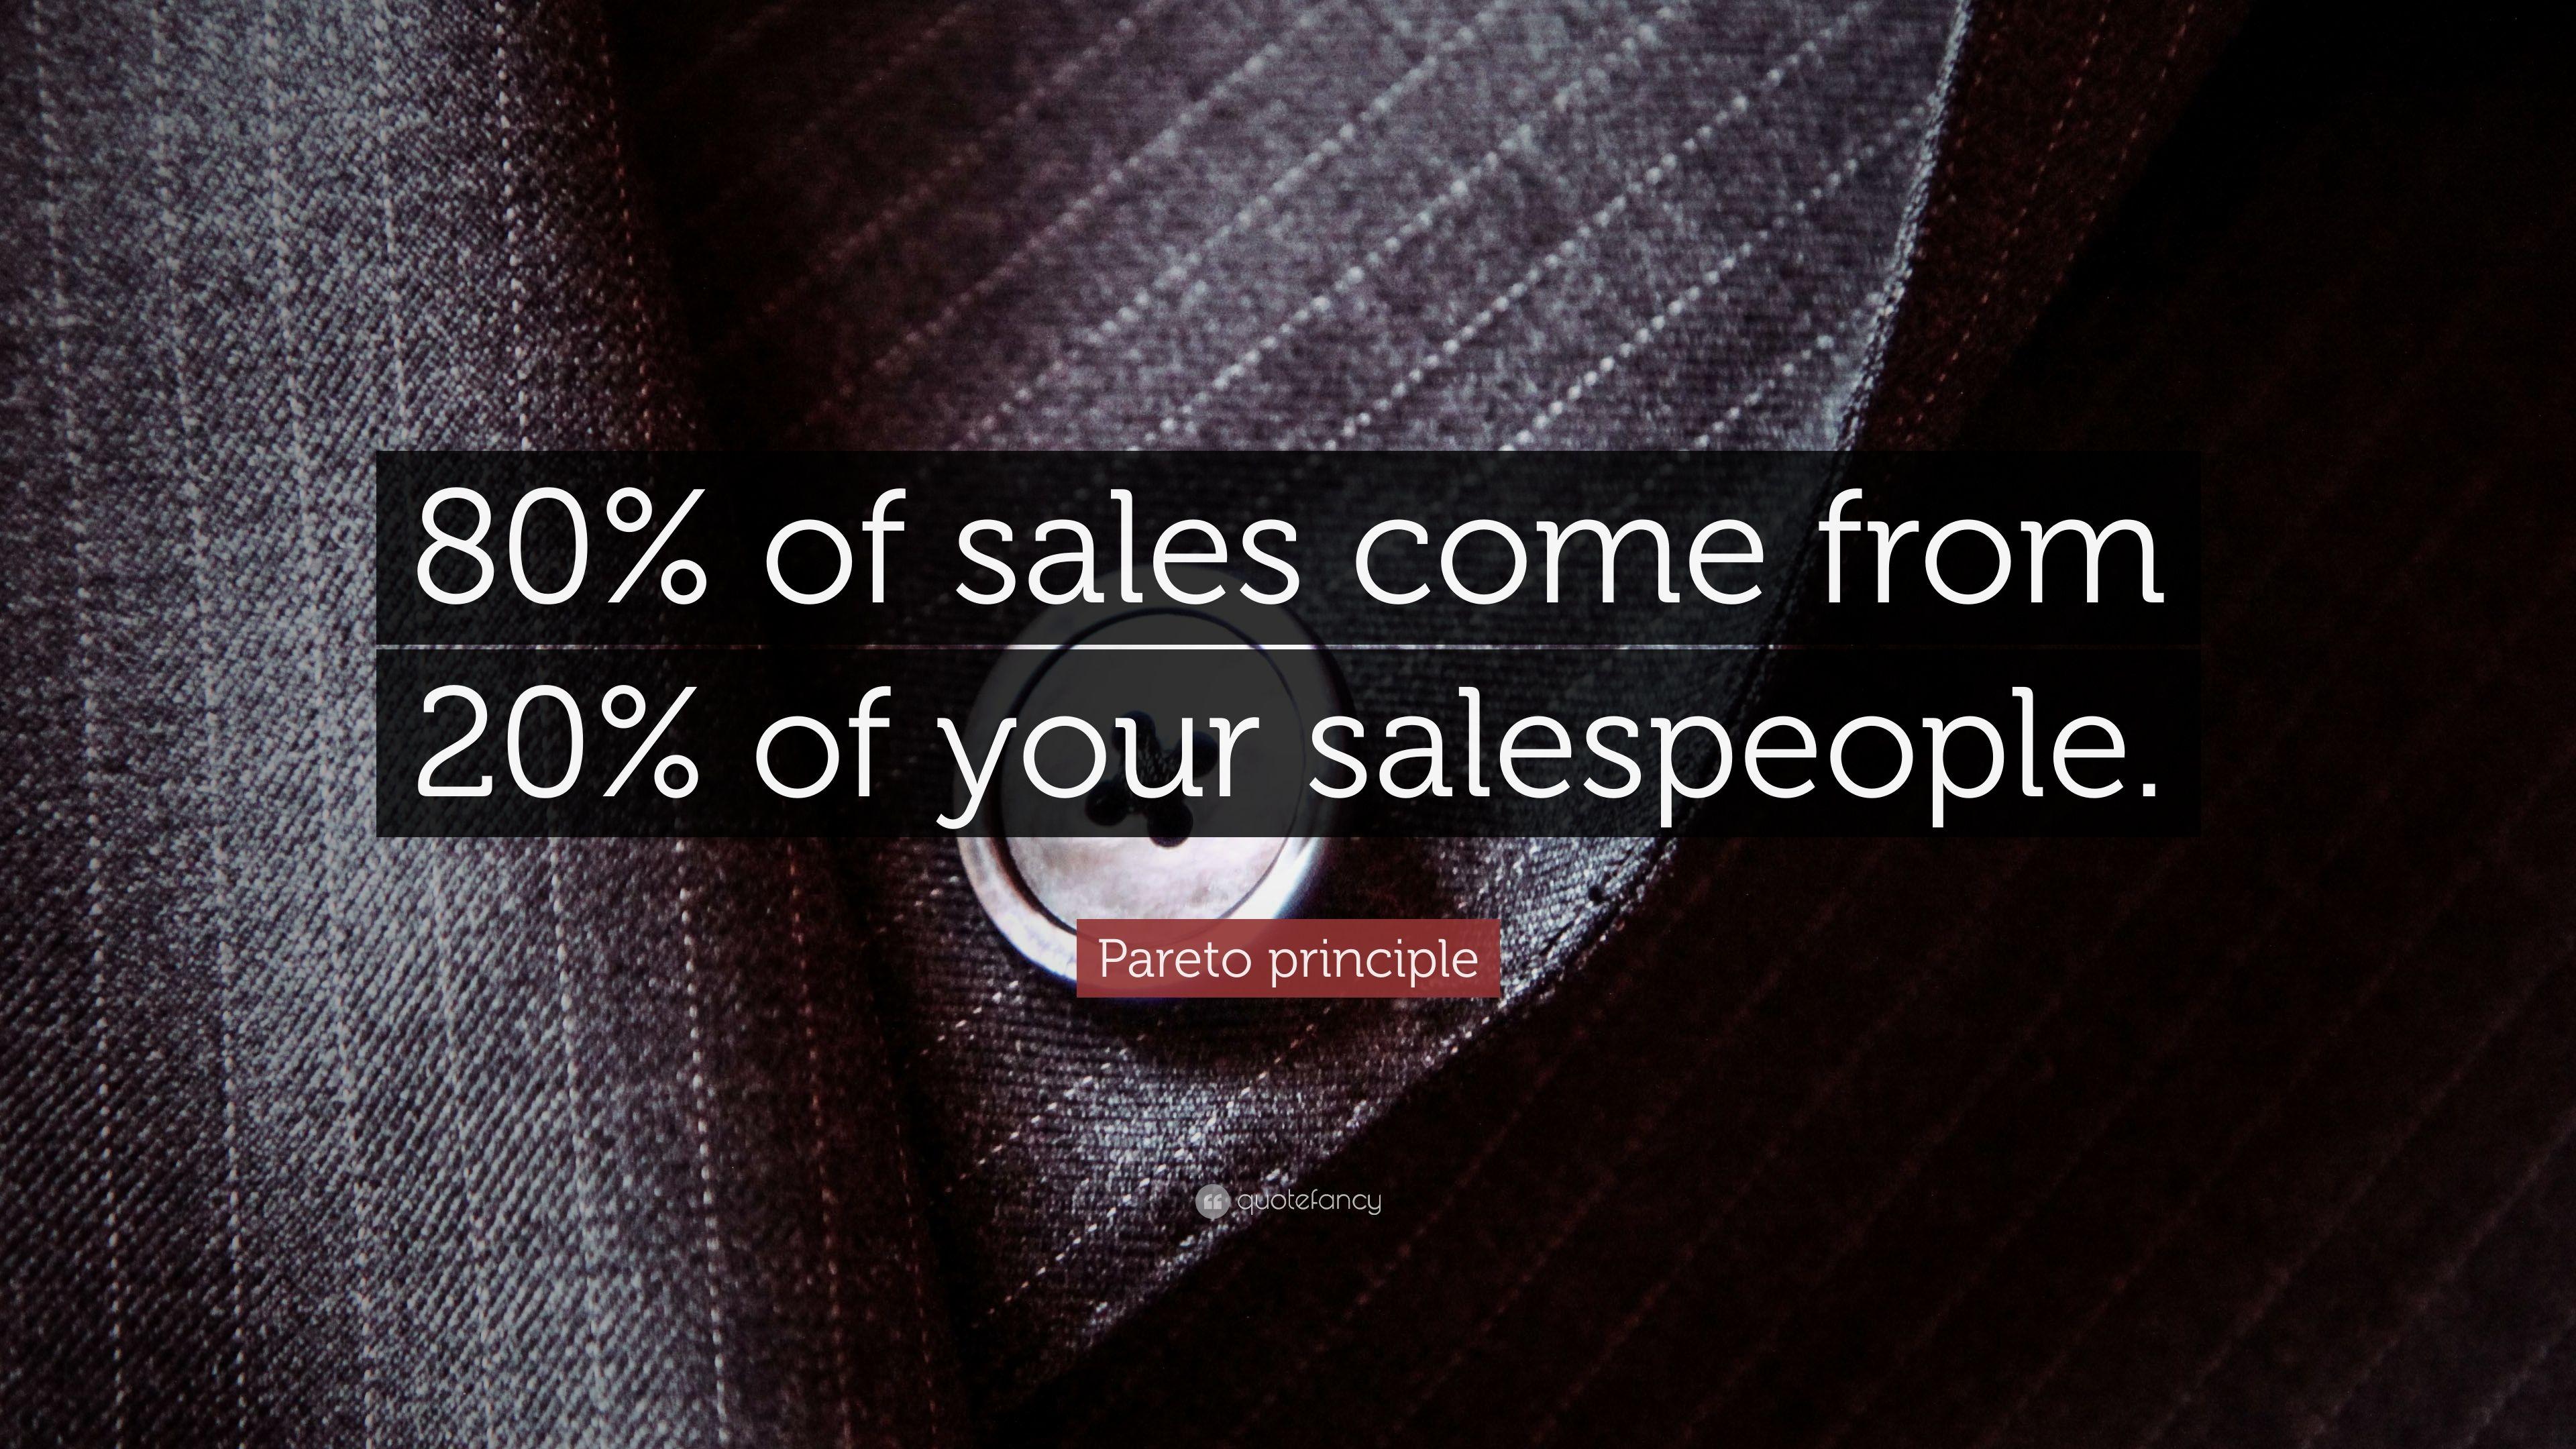 Pareto principle Quote: “80% of sales come from 20% of your